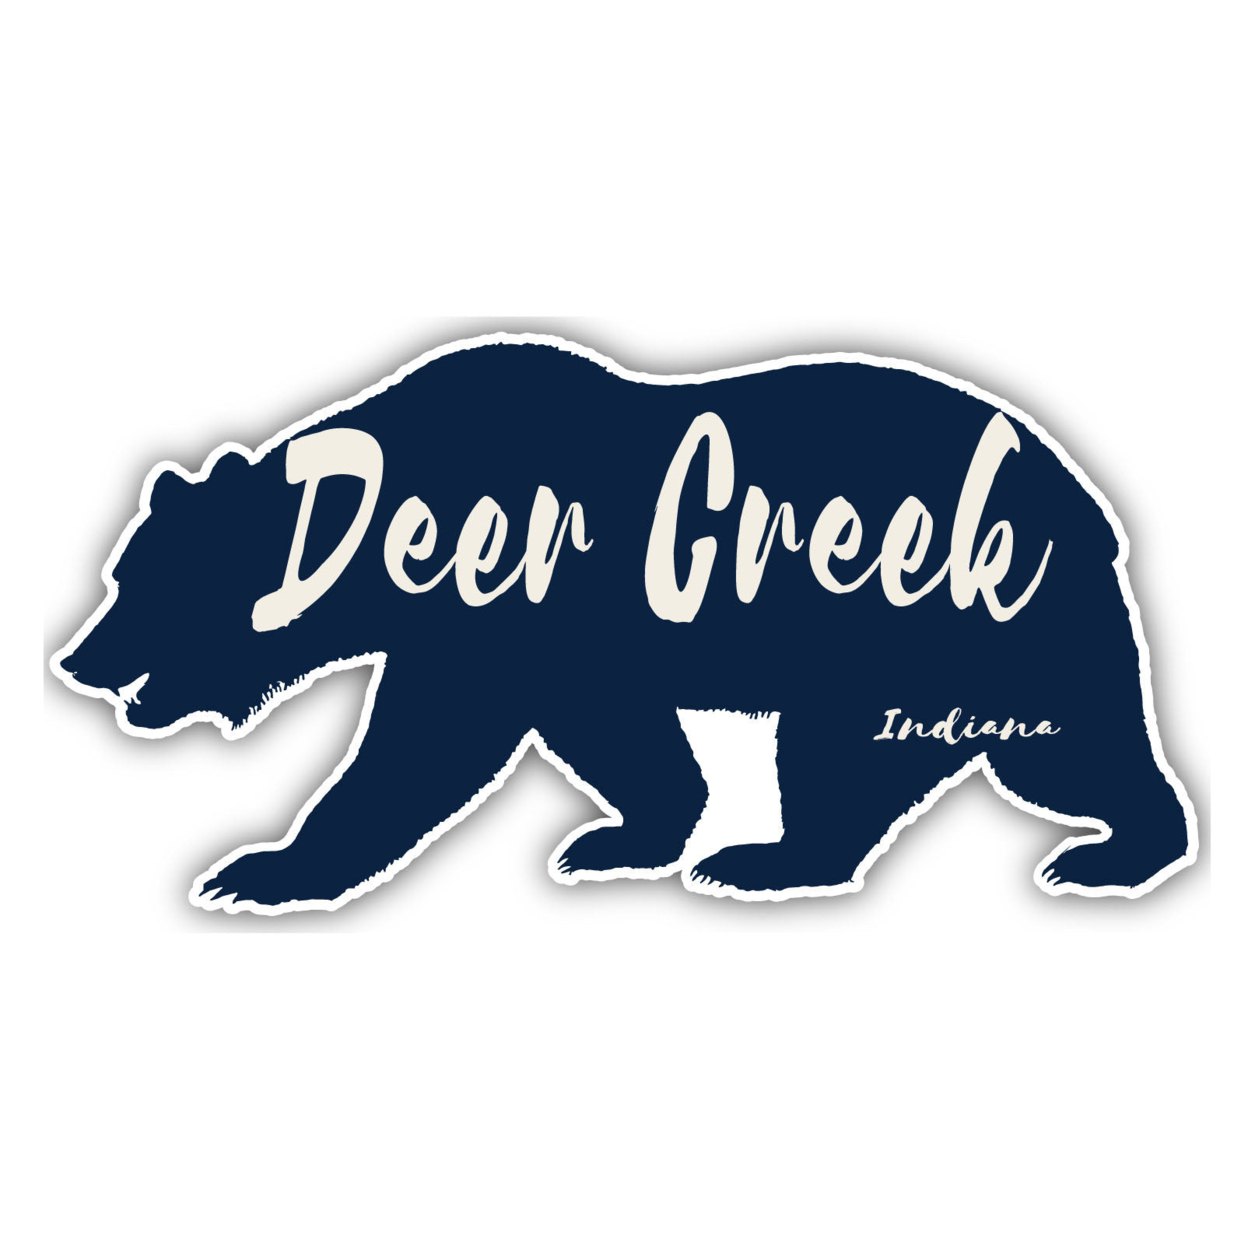 Deer Creek Indiana Souvenir Decorative Stickers (Choose Theme And Size) - 4-Pack, 10-Inch, Bear